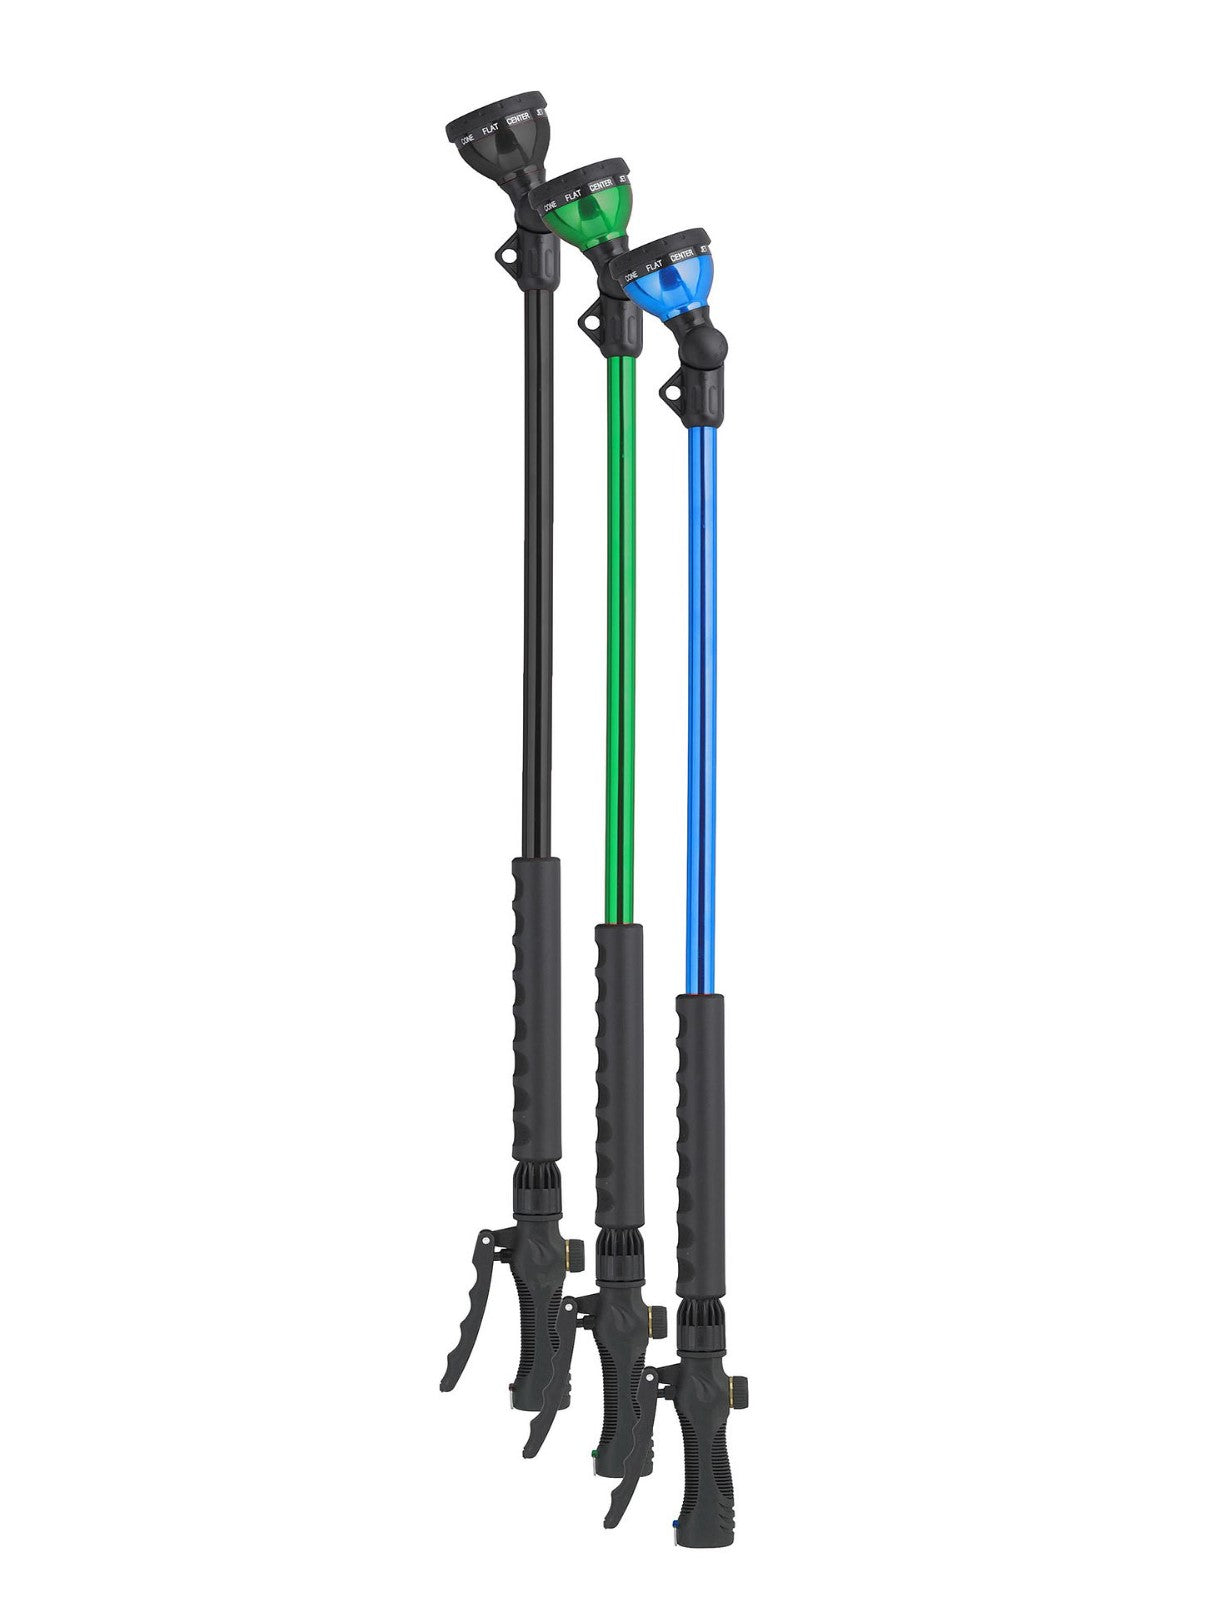 Three 10-pattern ratchet head wands in black, green and blue. 